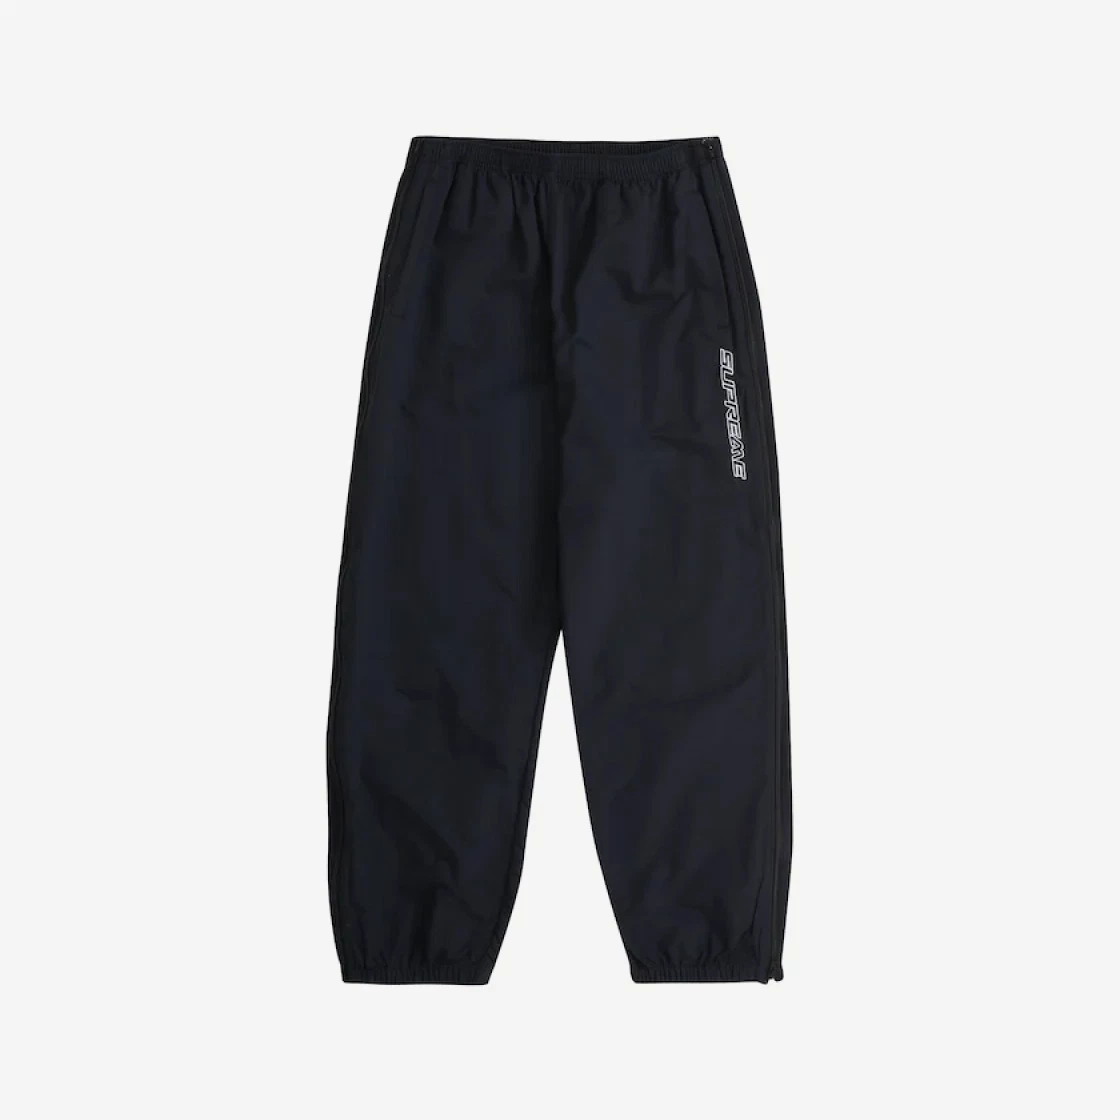 SASOM  apparel Supreme Full Zip Baggy Warm Up Pants Black - 23SS Check the  latest price now!